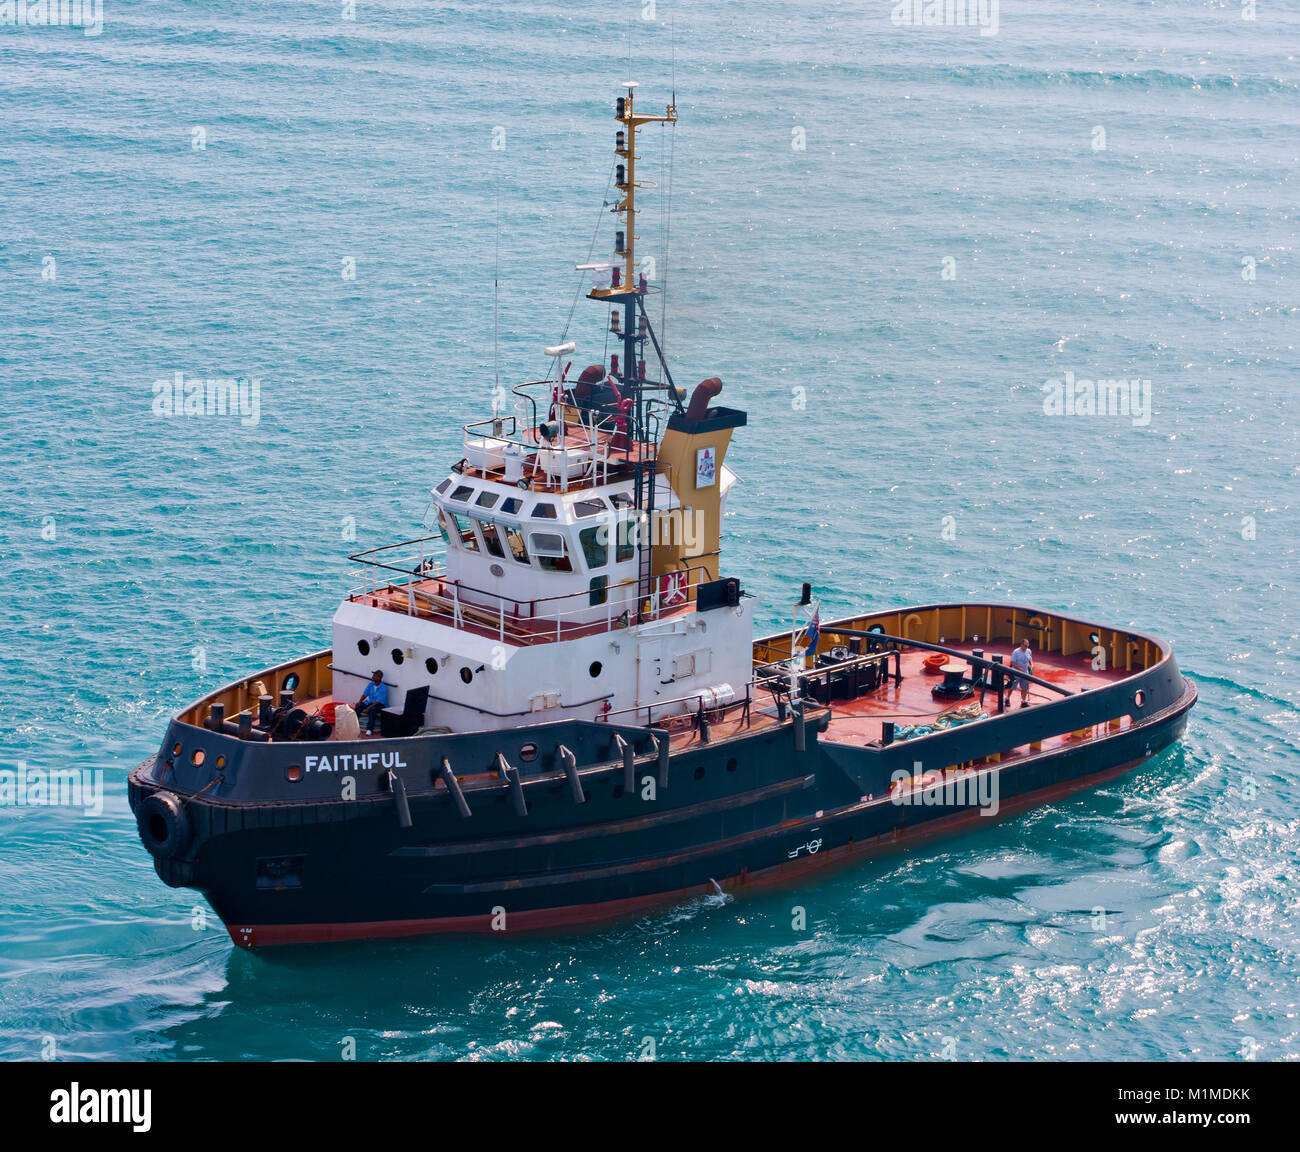 A tugboat named 'Faithful' in the ocean just off of Bermuda coast Stock Photo